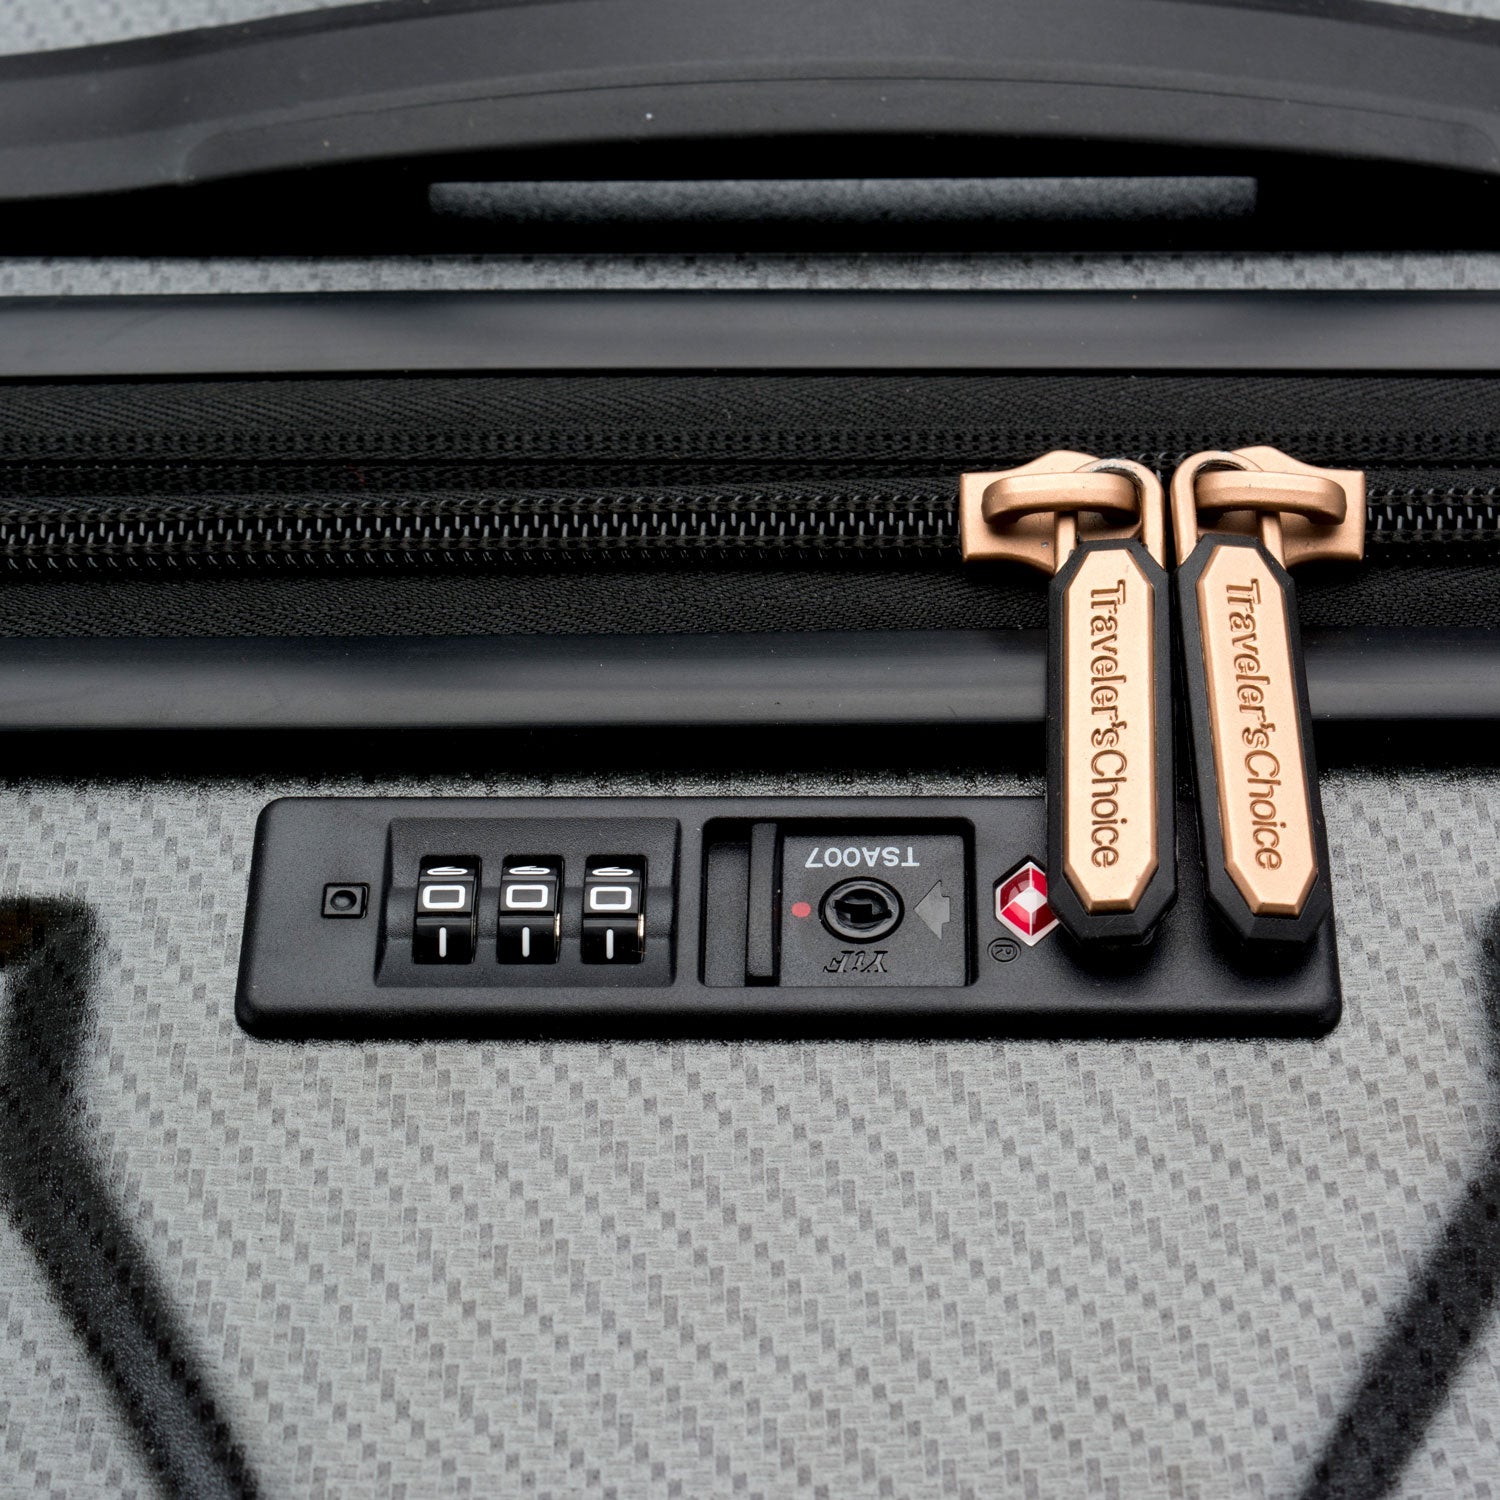 An image of the top of the gray luggage with the TSA lock.